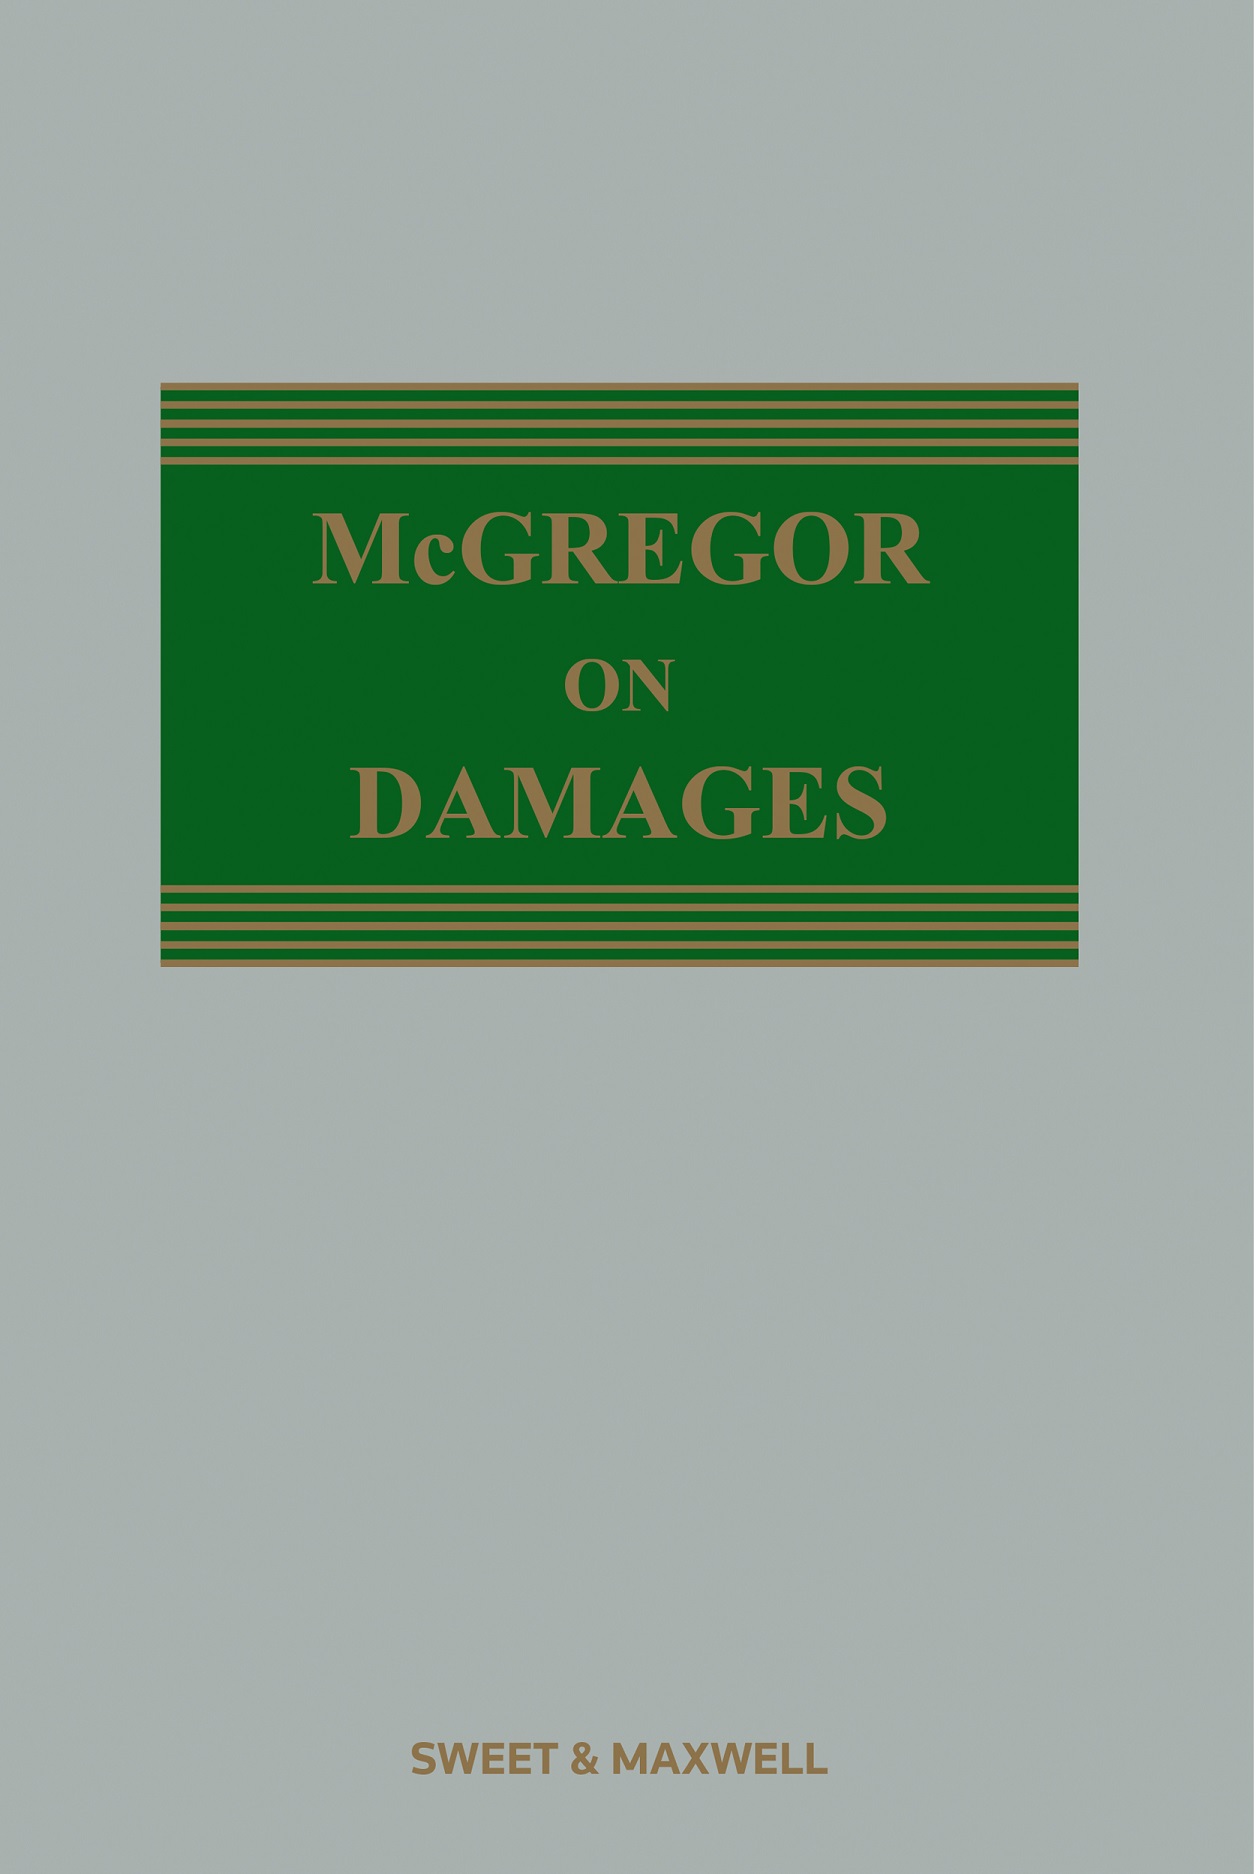 McGregor on Damages e21 (with supplement)